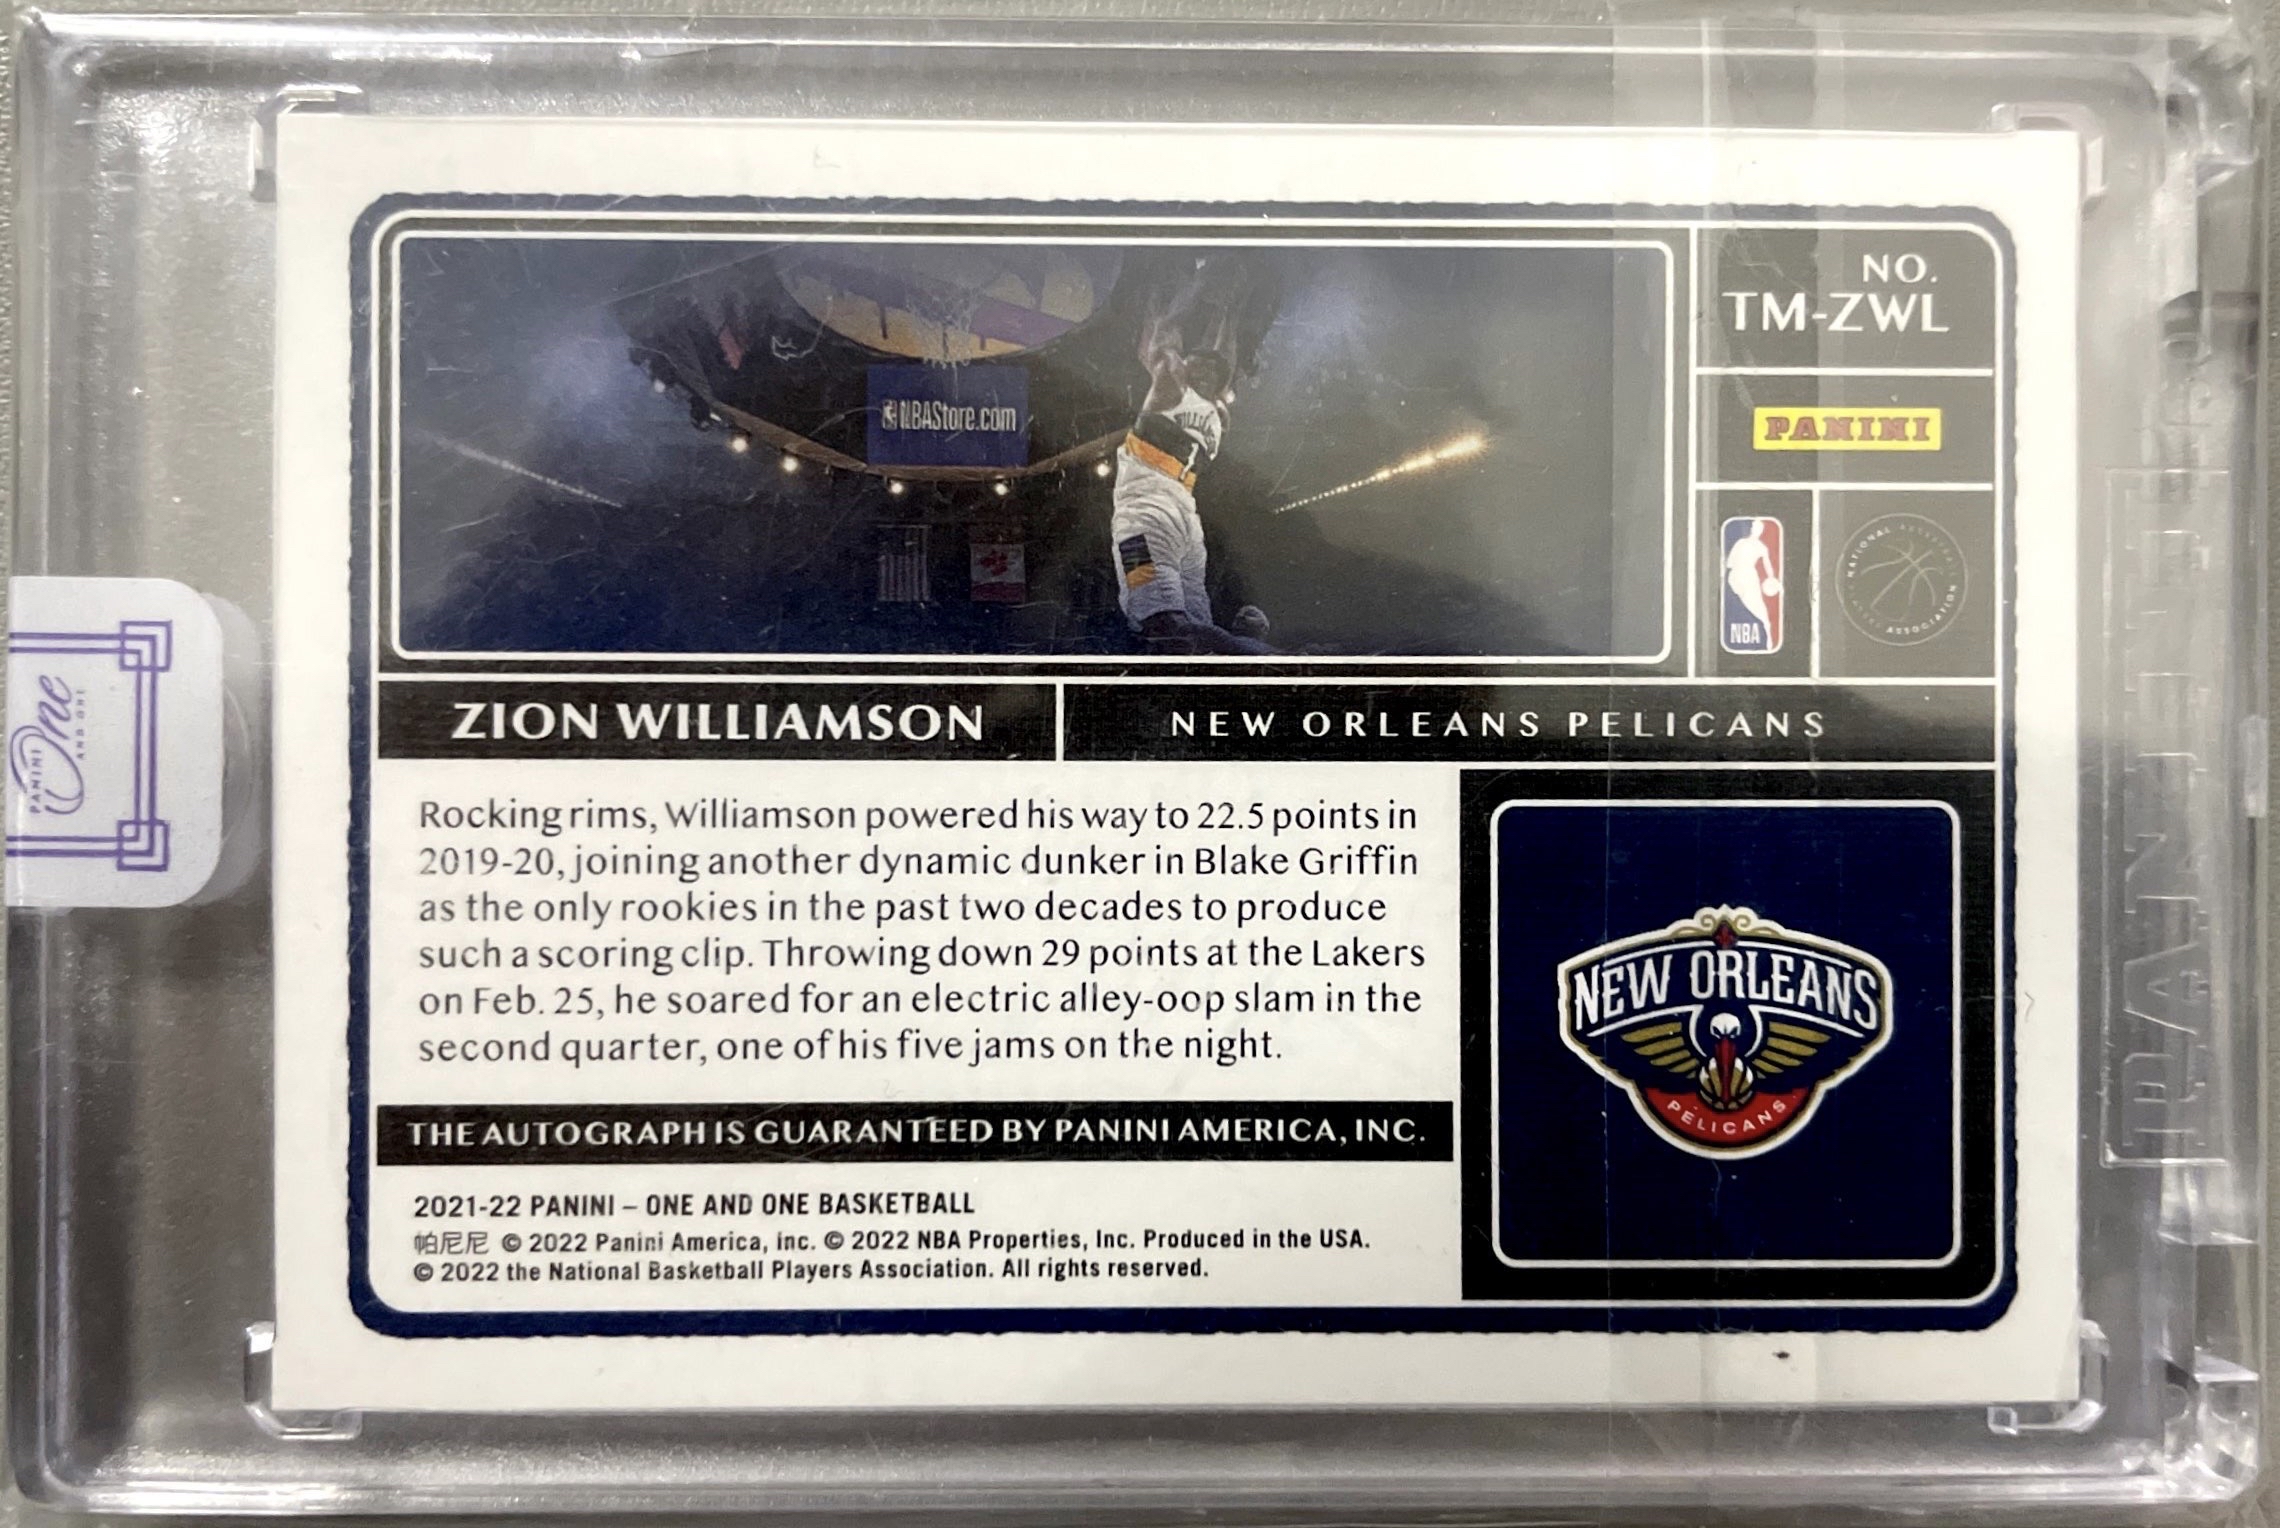 2021-22 Panini One and One Zion Williamson 锡安 胖虎 one and one oao 时刻 银笔签字 41/49编 原封砖。